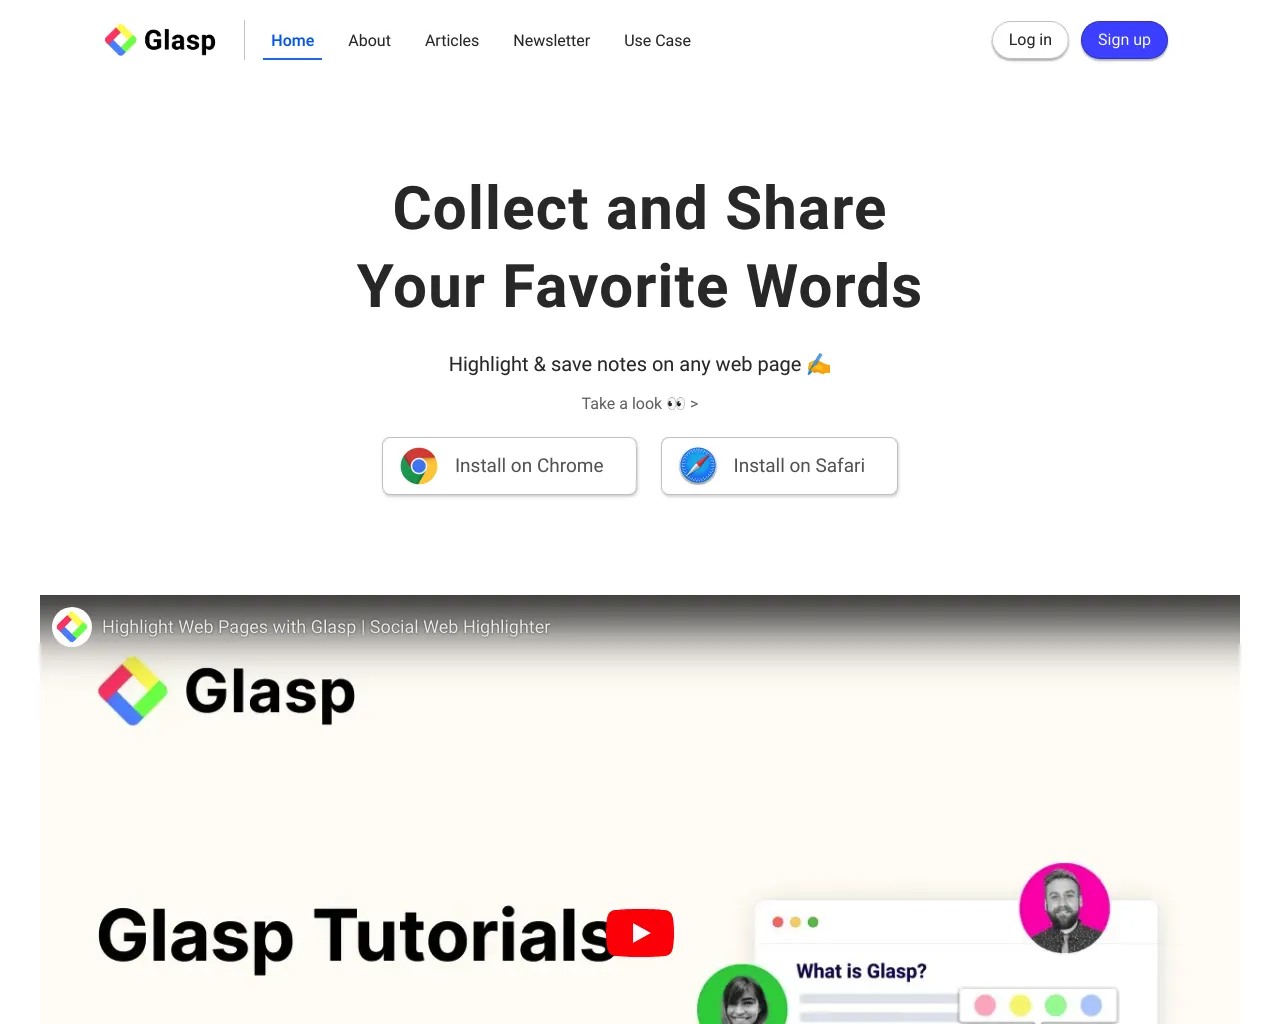 Glasp: Collect and Share Your Favorite Words